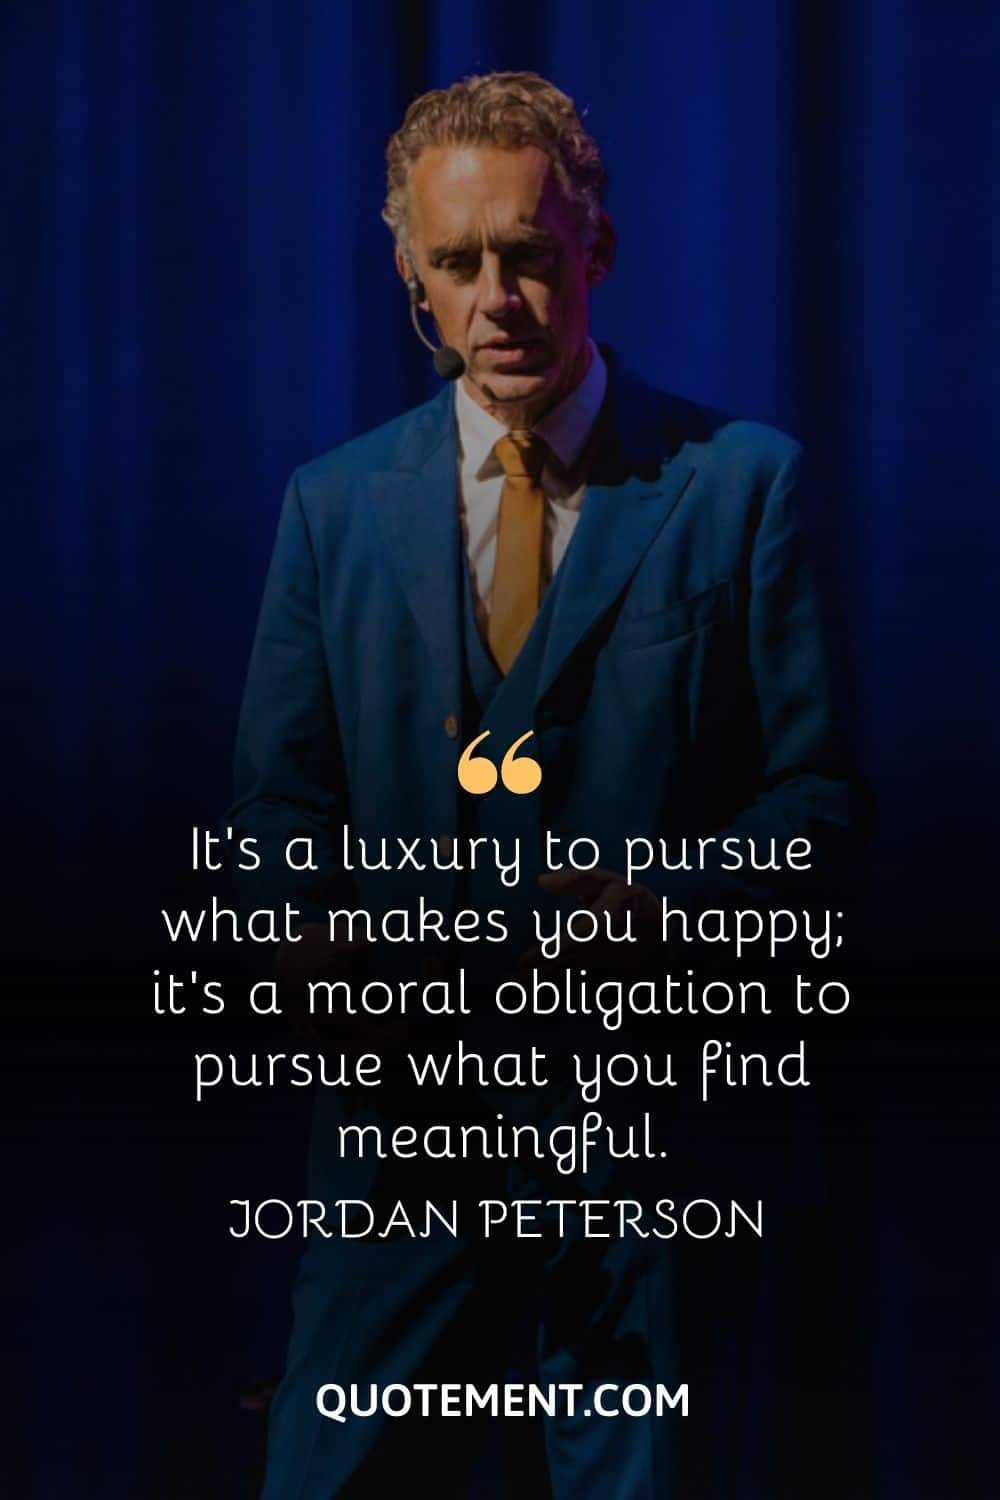 “It's a luxury to pursue what makes you happy; it's a moral obligation to pursue what you find meaningful.” — Jordan Peterson